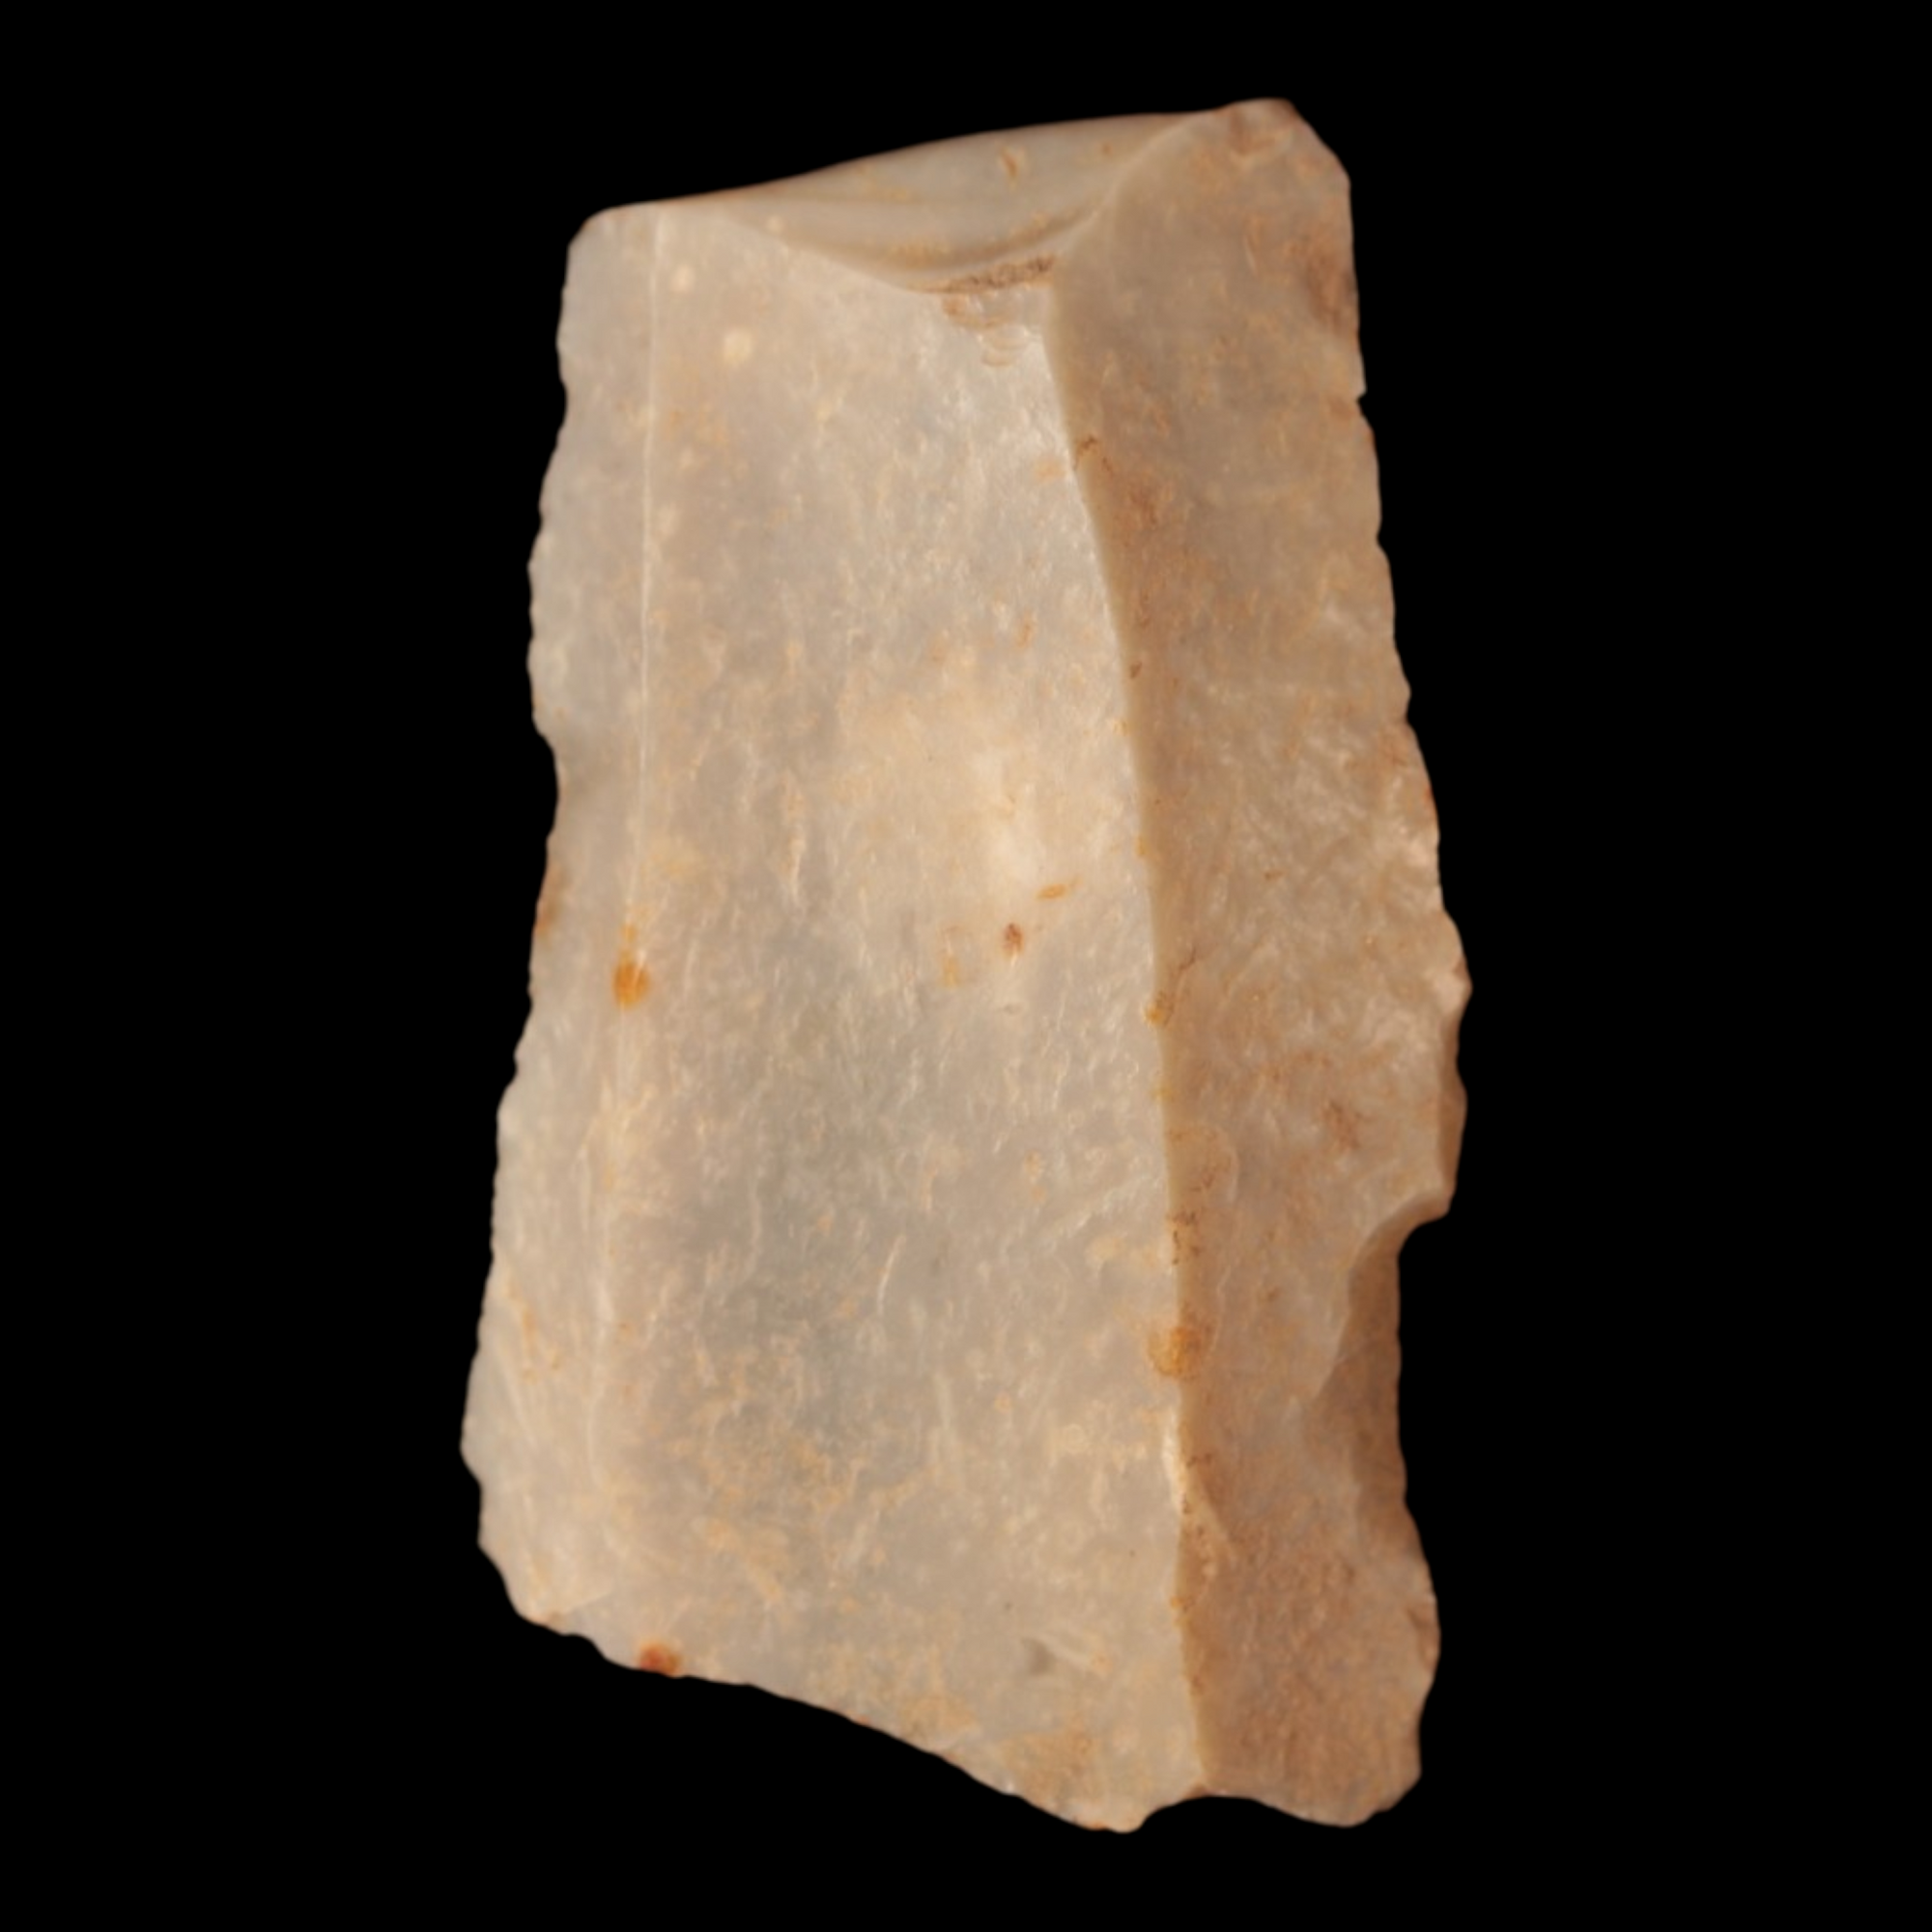 Danish Mesolithic Stone Tool #6 (1.9 inches) - c. 9000 to 5000 BCE - Denmark - 7/12/23 Auction